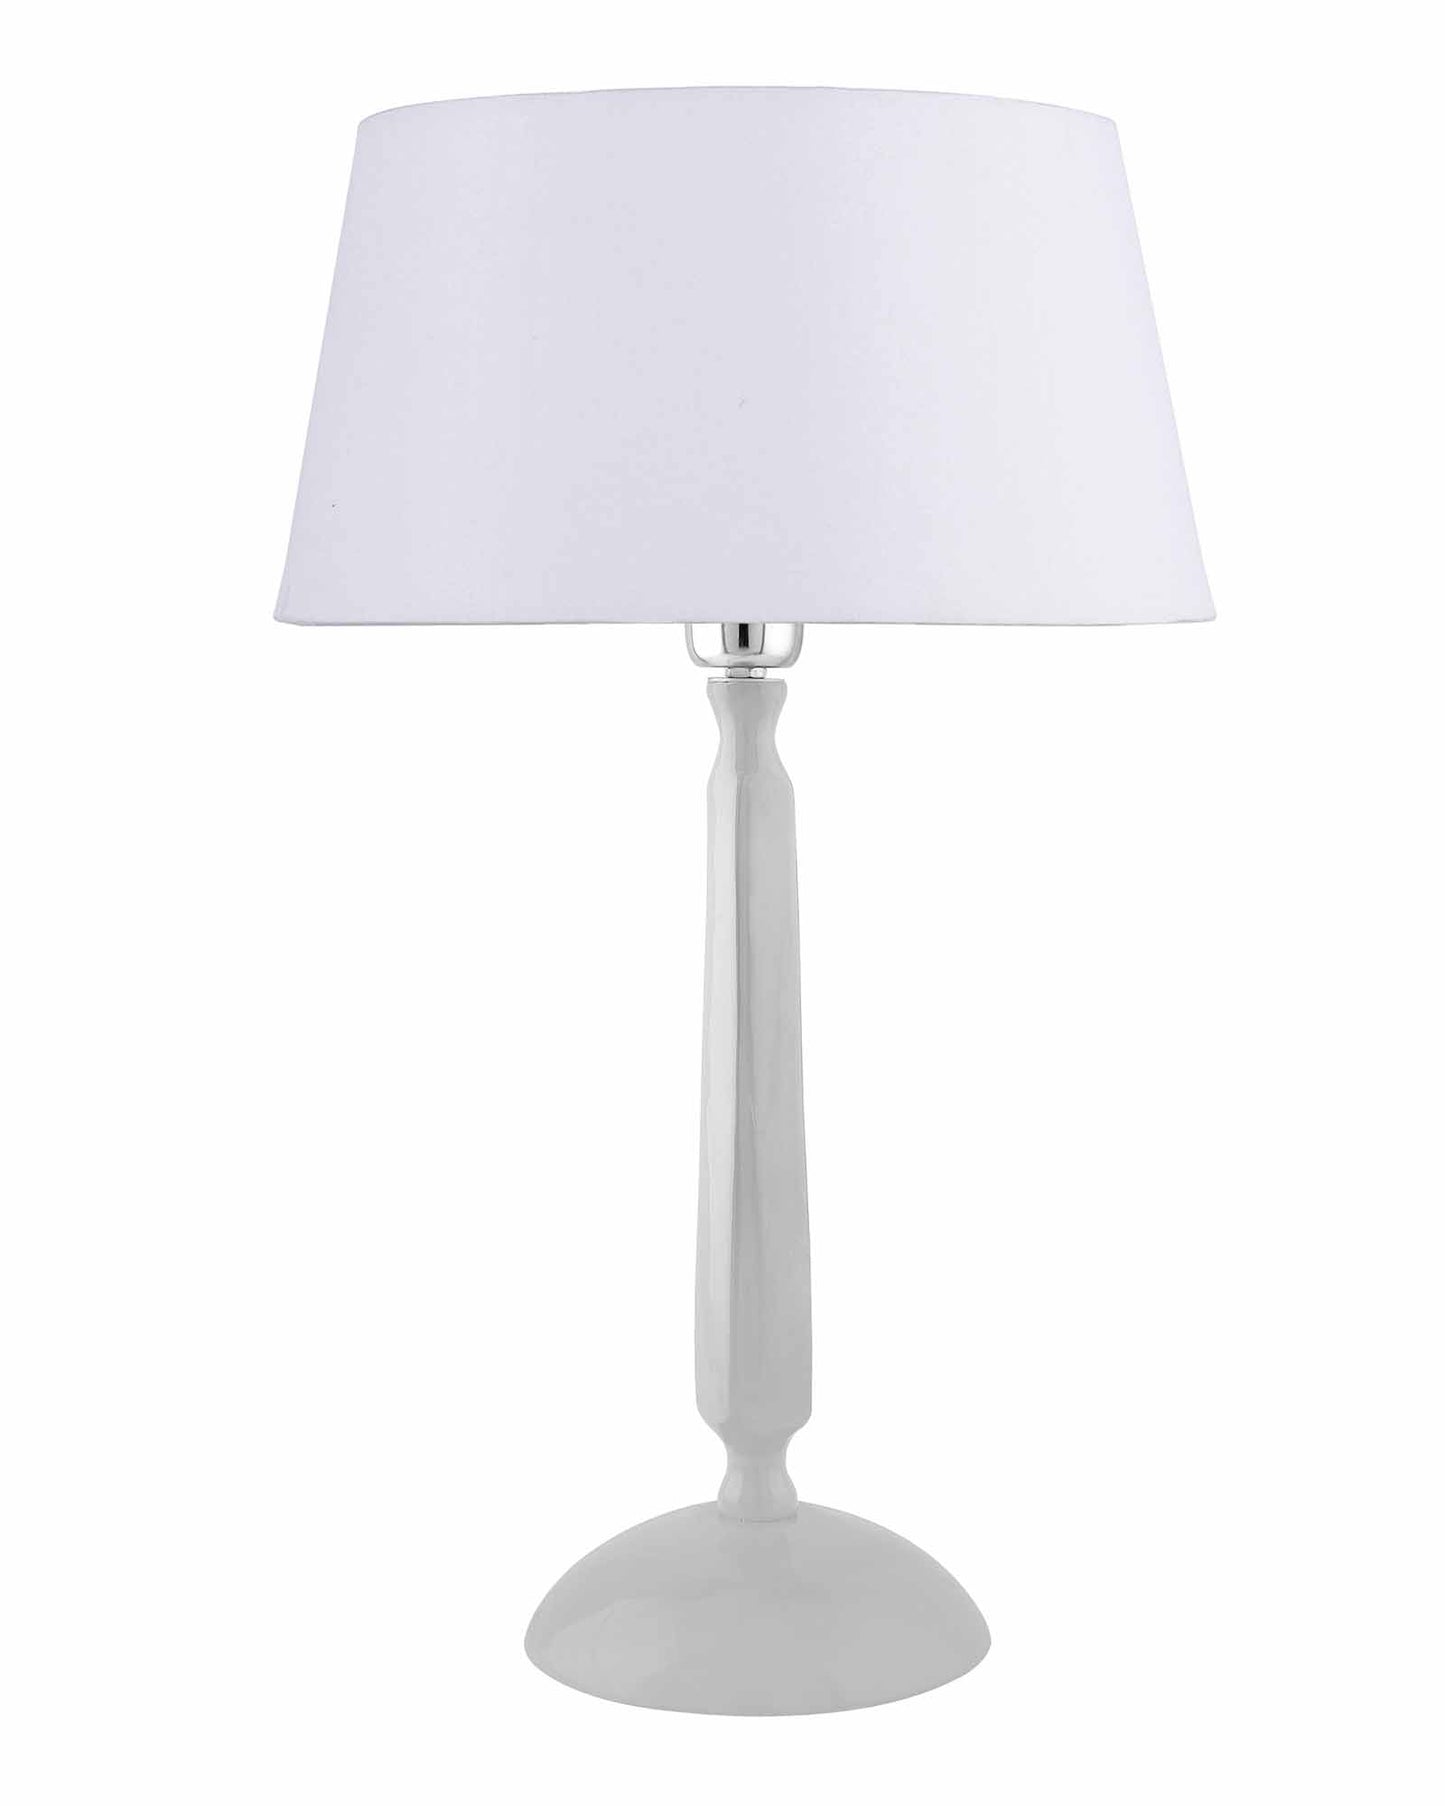 Glossy White Cubist Aluminium Table Lamp WithCone Shade, Bedside, Living Room Study Lamp, Bulb Included